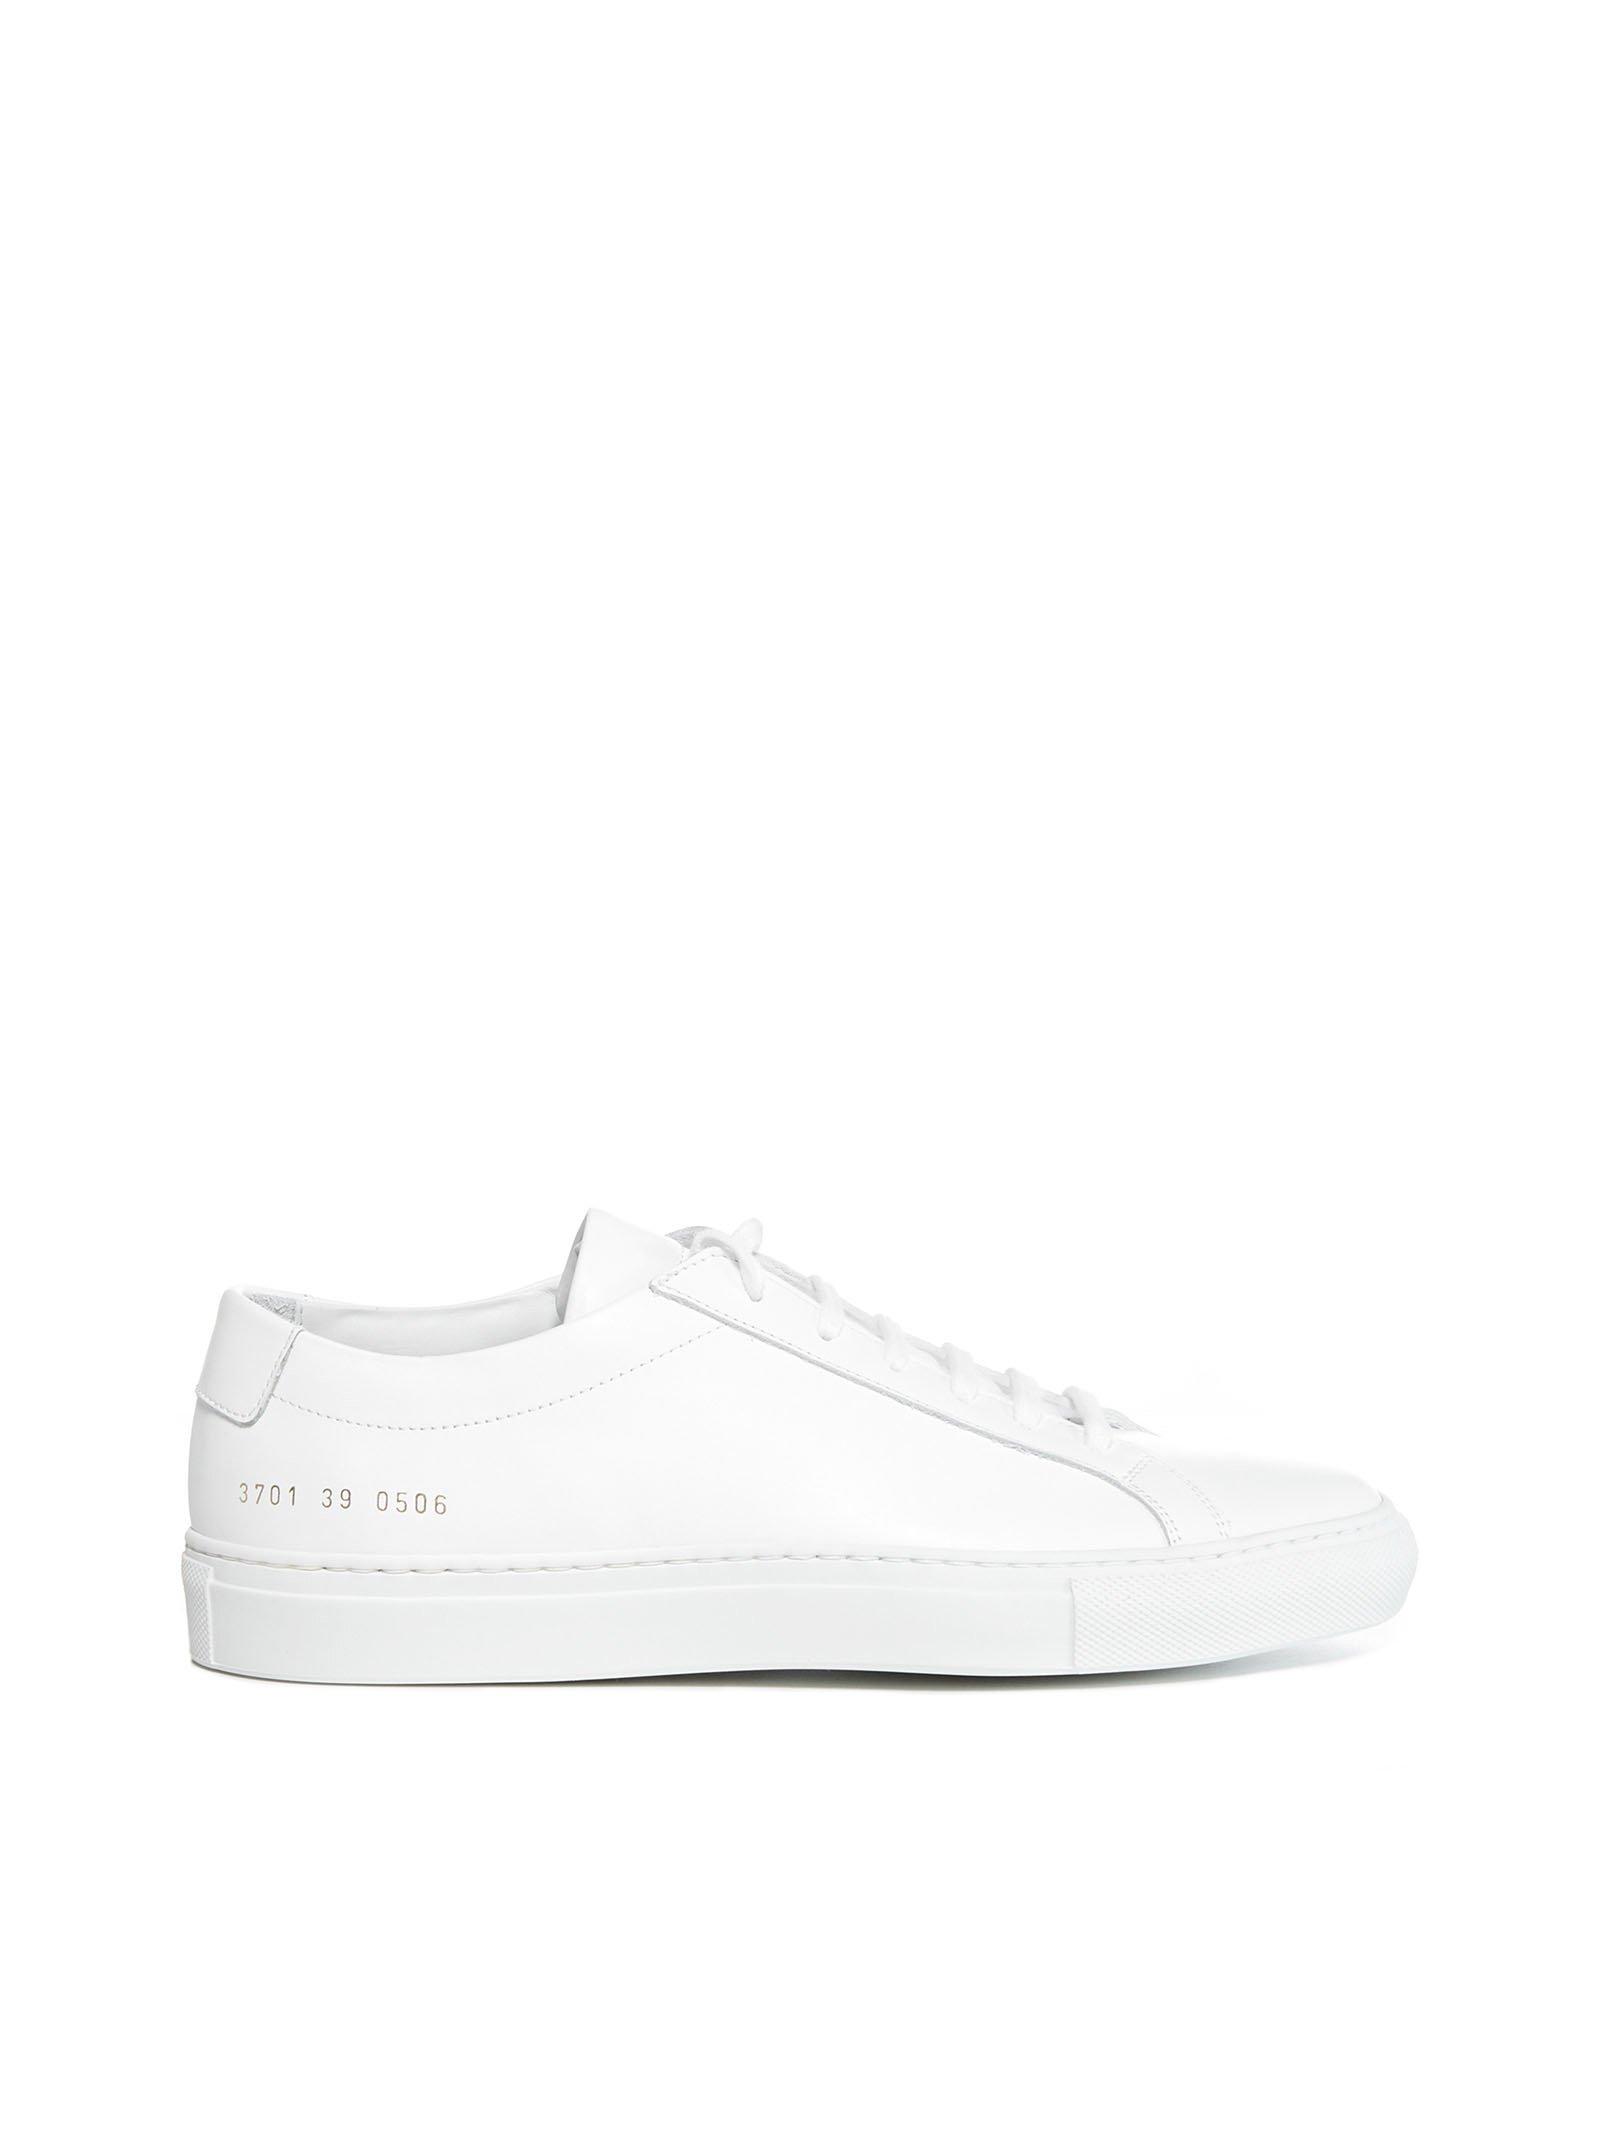 Common Projects Leather Sneakers White for Men - Save 35% - Lyst